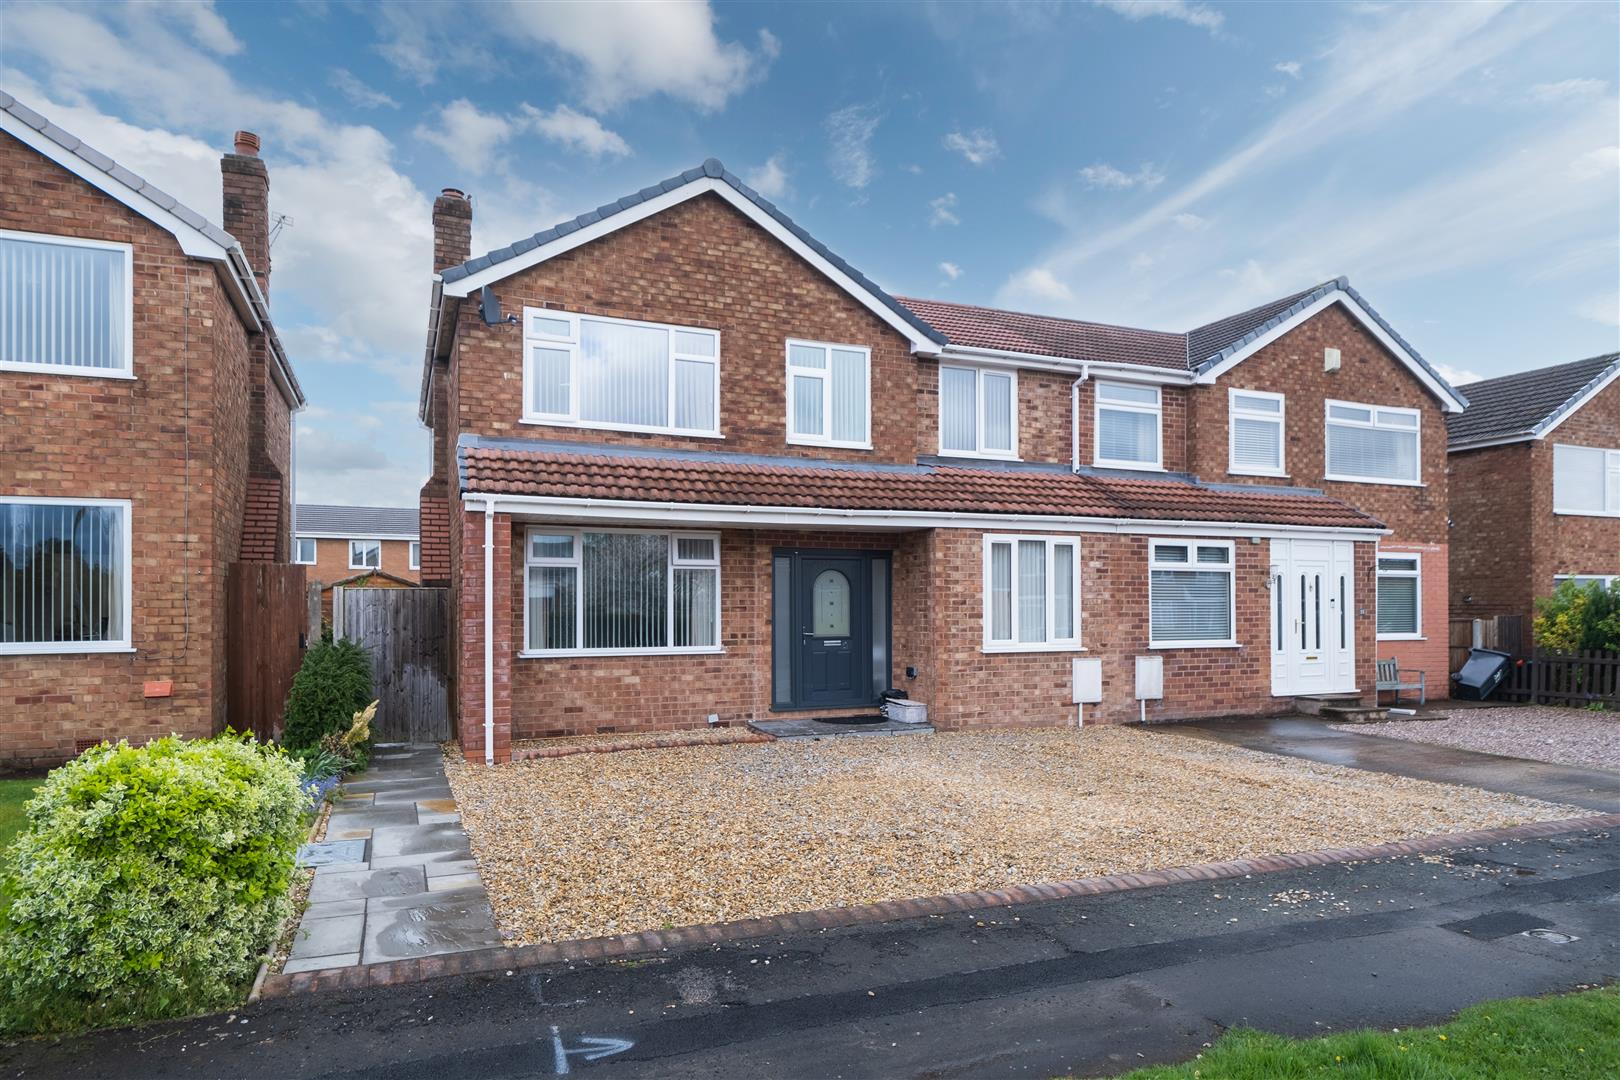 5 bedroom  Semi Detached House for Sale in Northwich